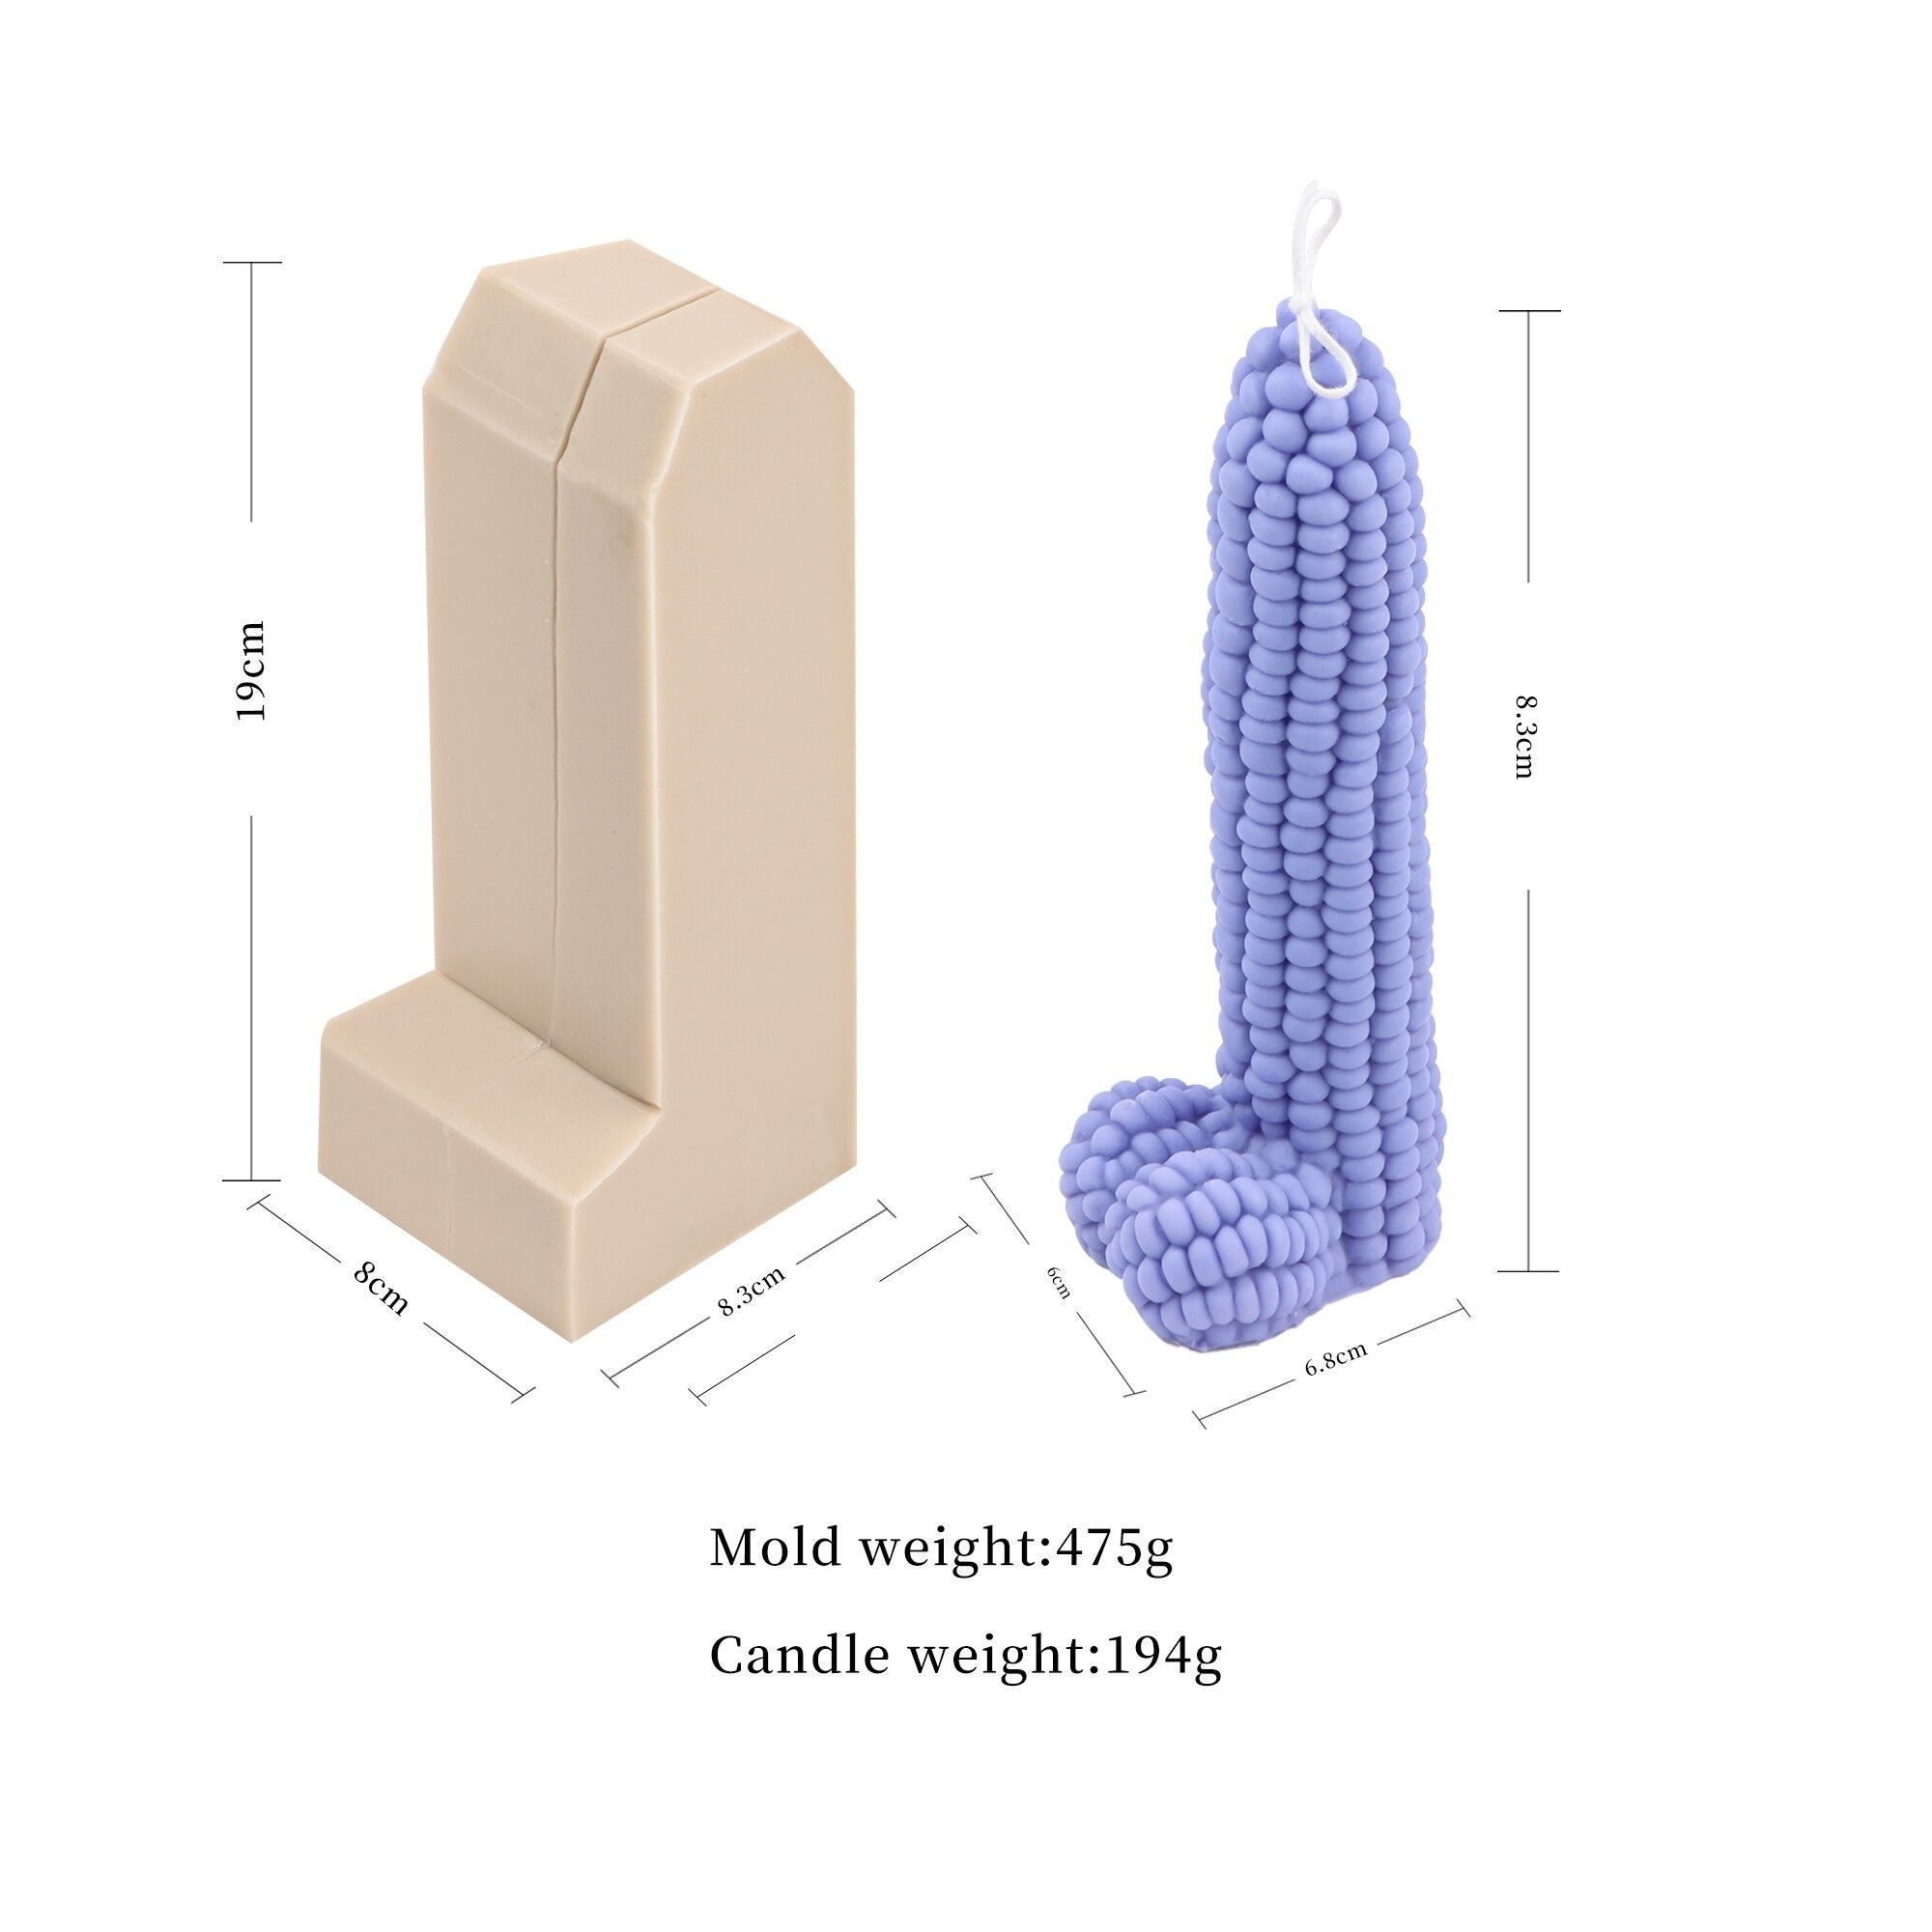 3D Mature Content Silicone Mold Penis Mold X18 Mold Mature Mold Chocolate  Mold Candle Mold Soap Penis Mold -  Israel